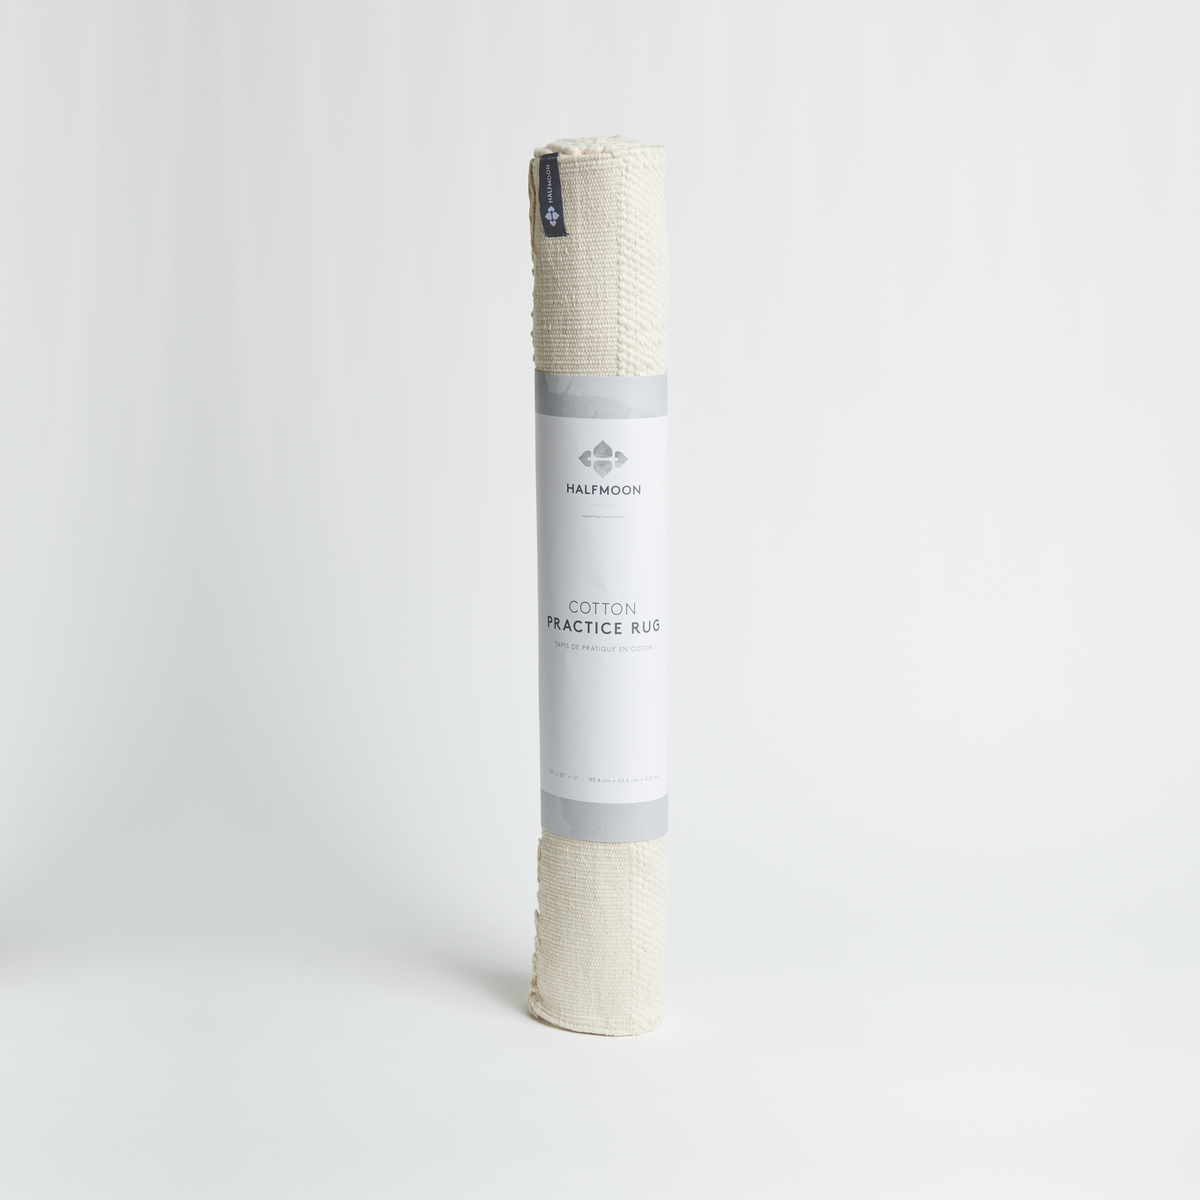 Halfmoon Cotton Practice Rug rolled with packaging